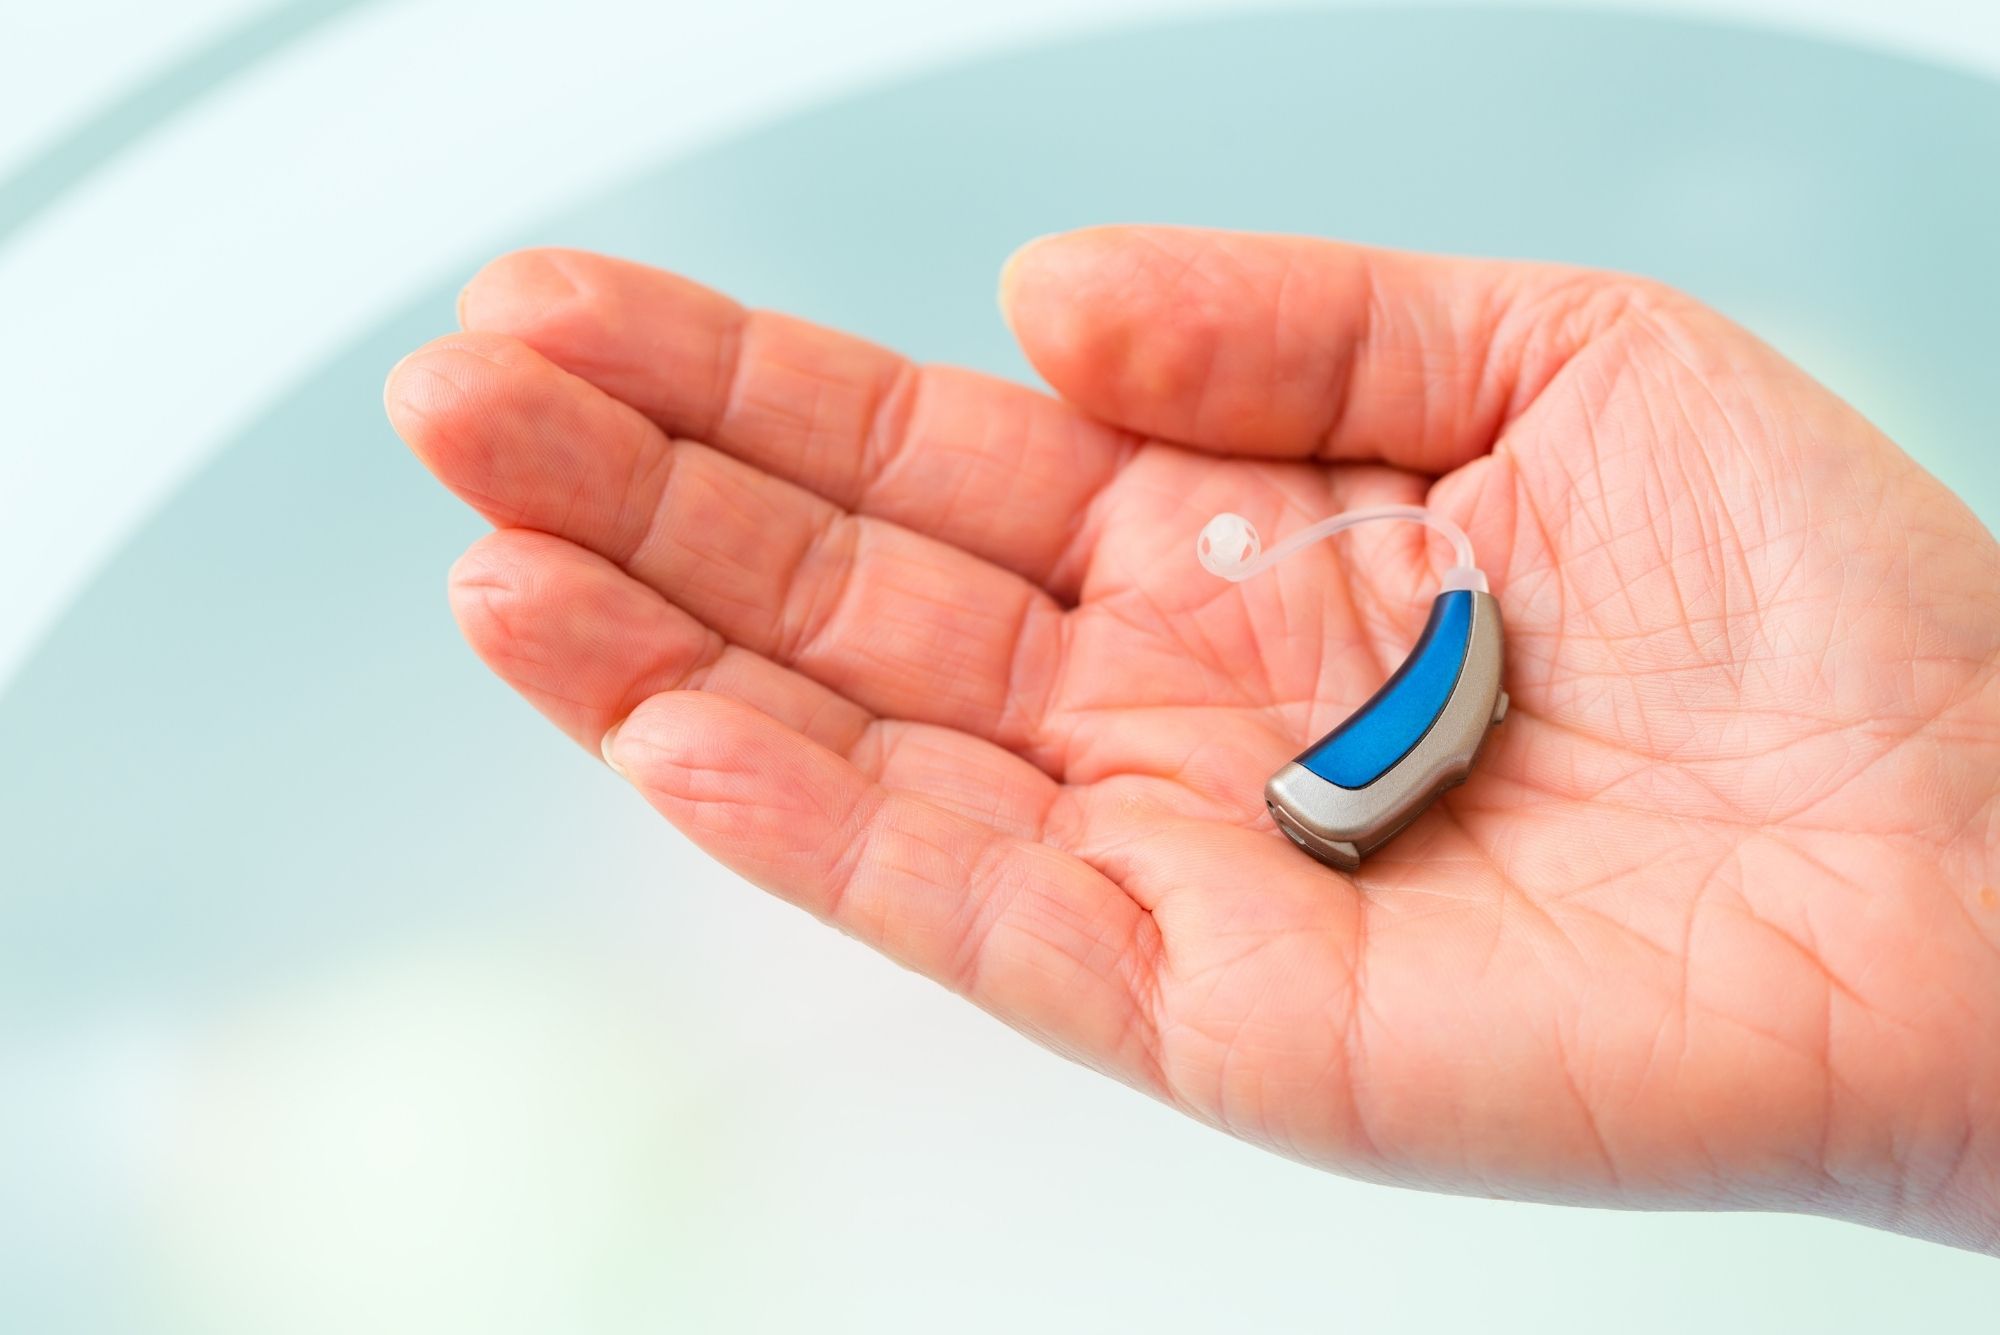 A hand holds a small blue hearing aid in its palm, representing ideas on how to prevent hearing loss.